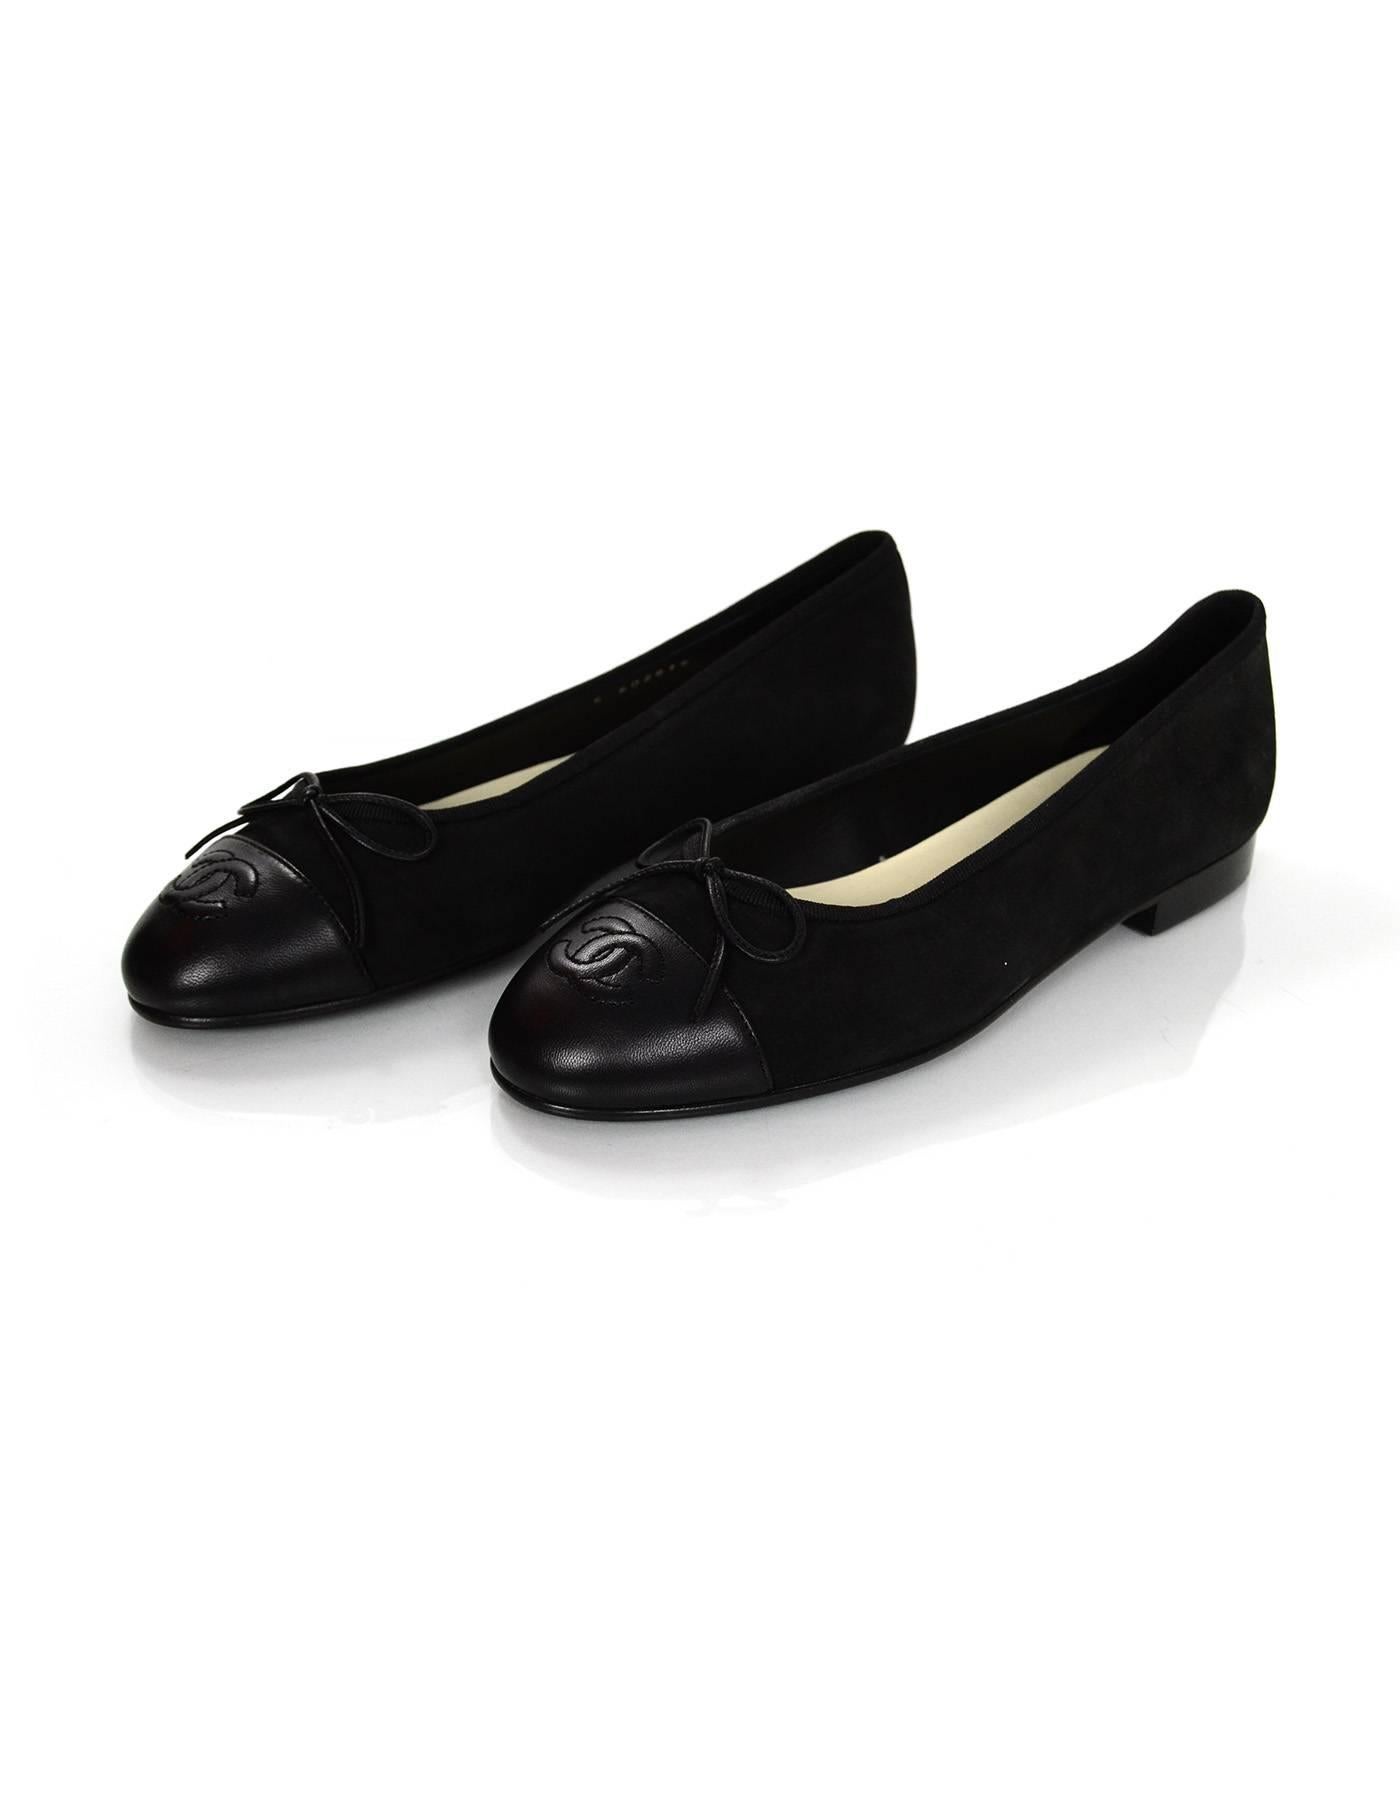 Chanel Black Suede Ballet Flats Sz 36.5 NIB

Made In: Italy
Color: Black
Materials: Suede. leather
Closure/Opening: Slide on
Sole Stamp: CC Made in Italy 36.5
Retail Price: $750 + tax
Overall Condition: Excellent pre-owned condition - NIB
Included: